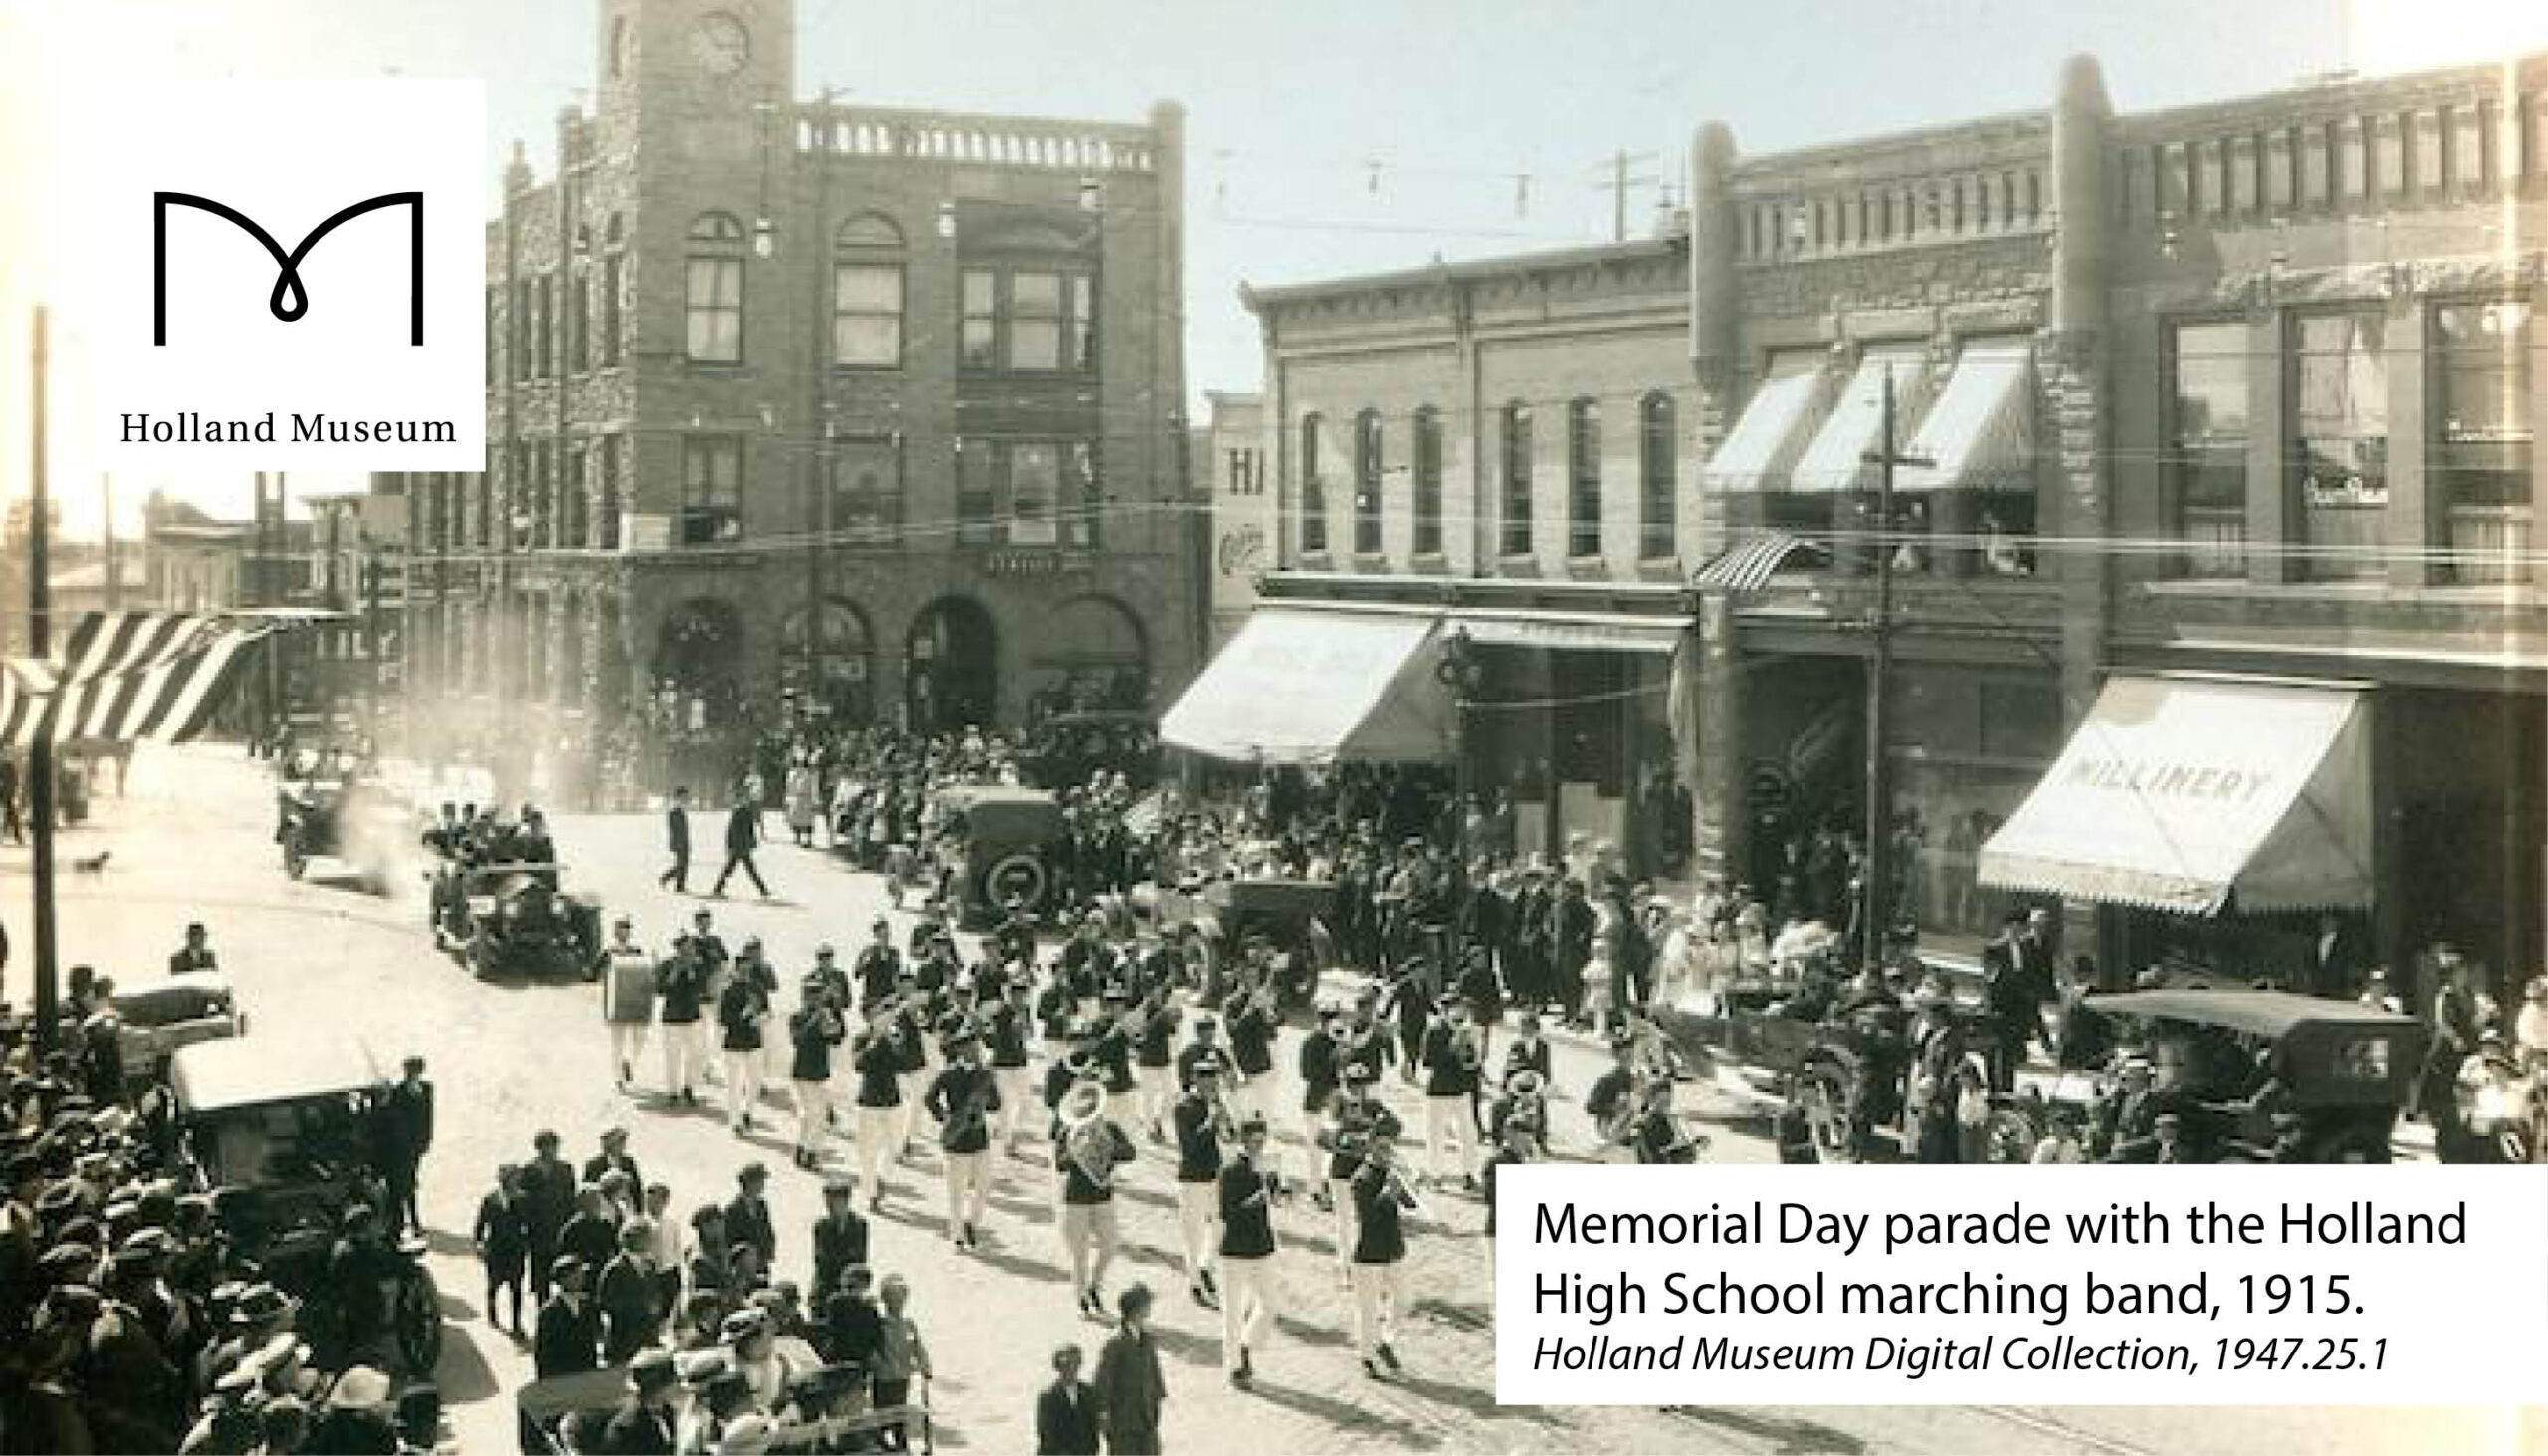 Memorial Day parade in downtown Holland, 1915